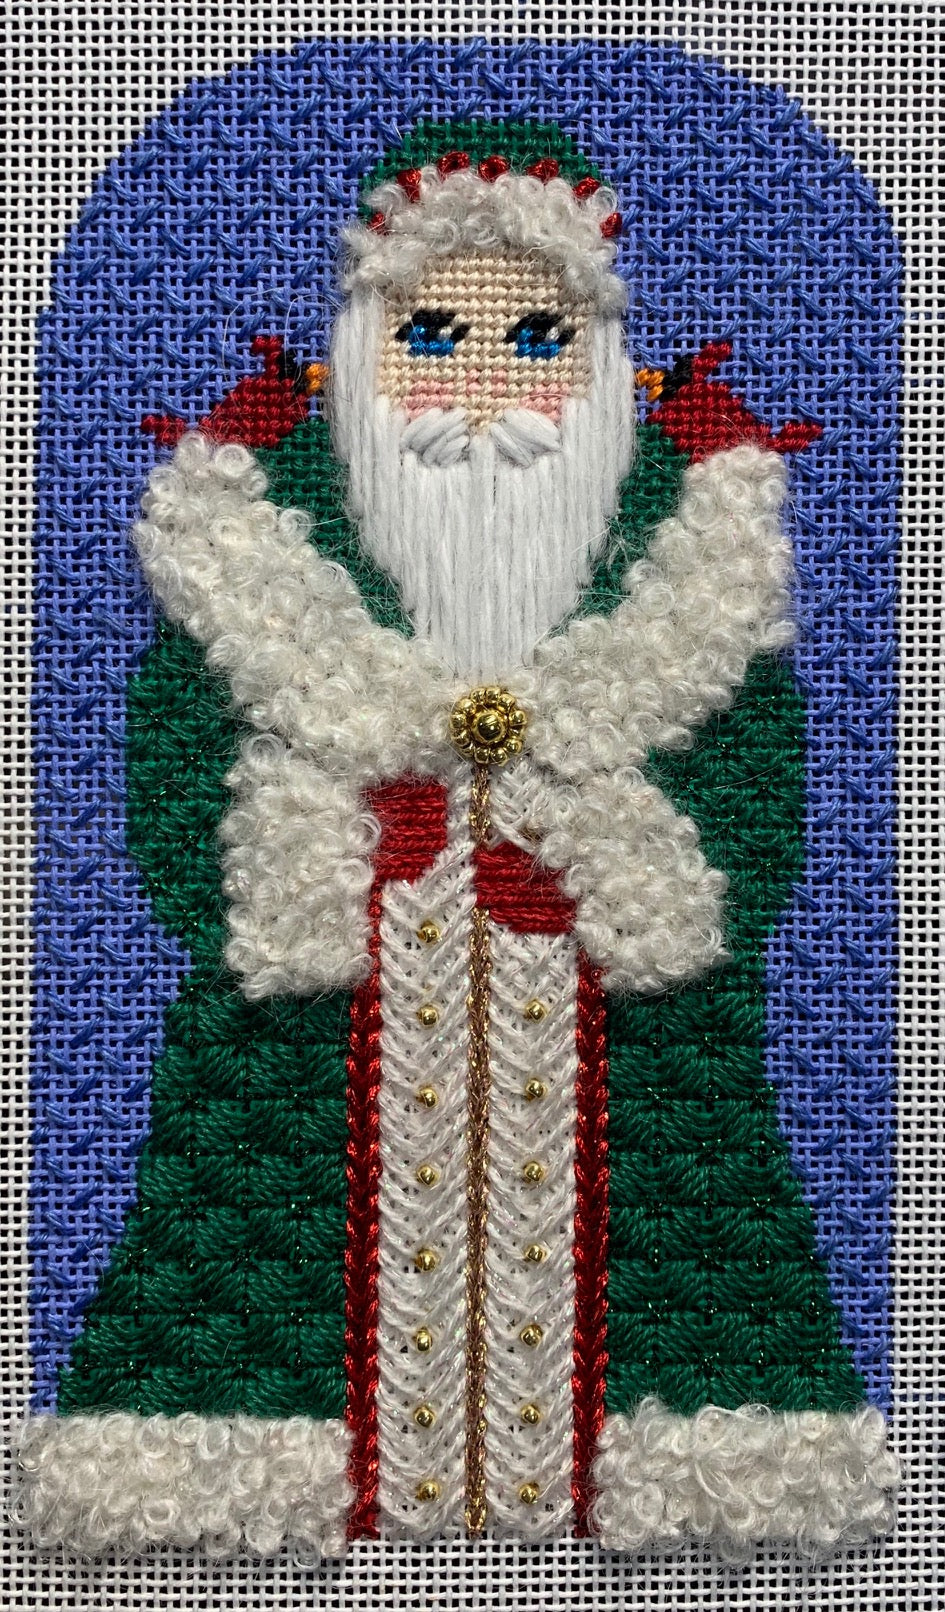 Stitched example of the Vallerie Needlepoint Gallery cardinal Santa with green coat with white fur trim